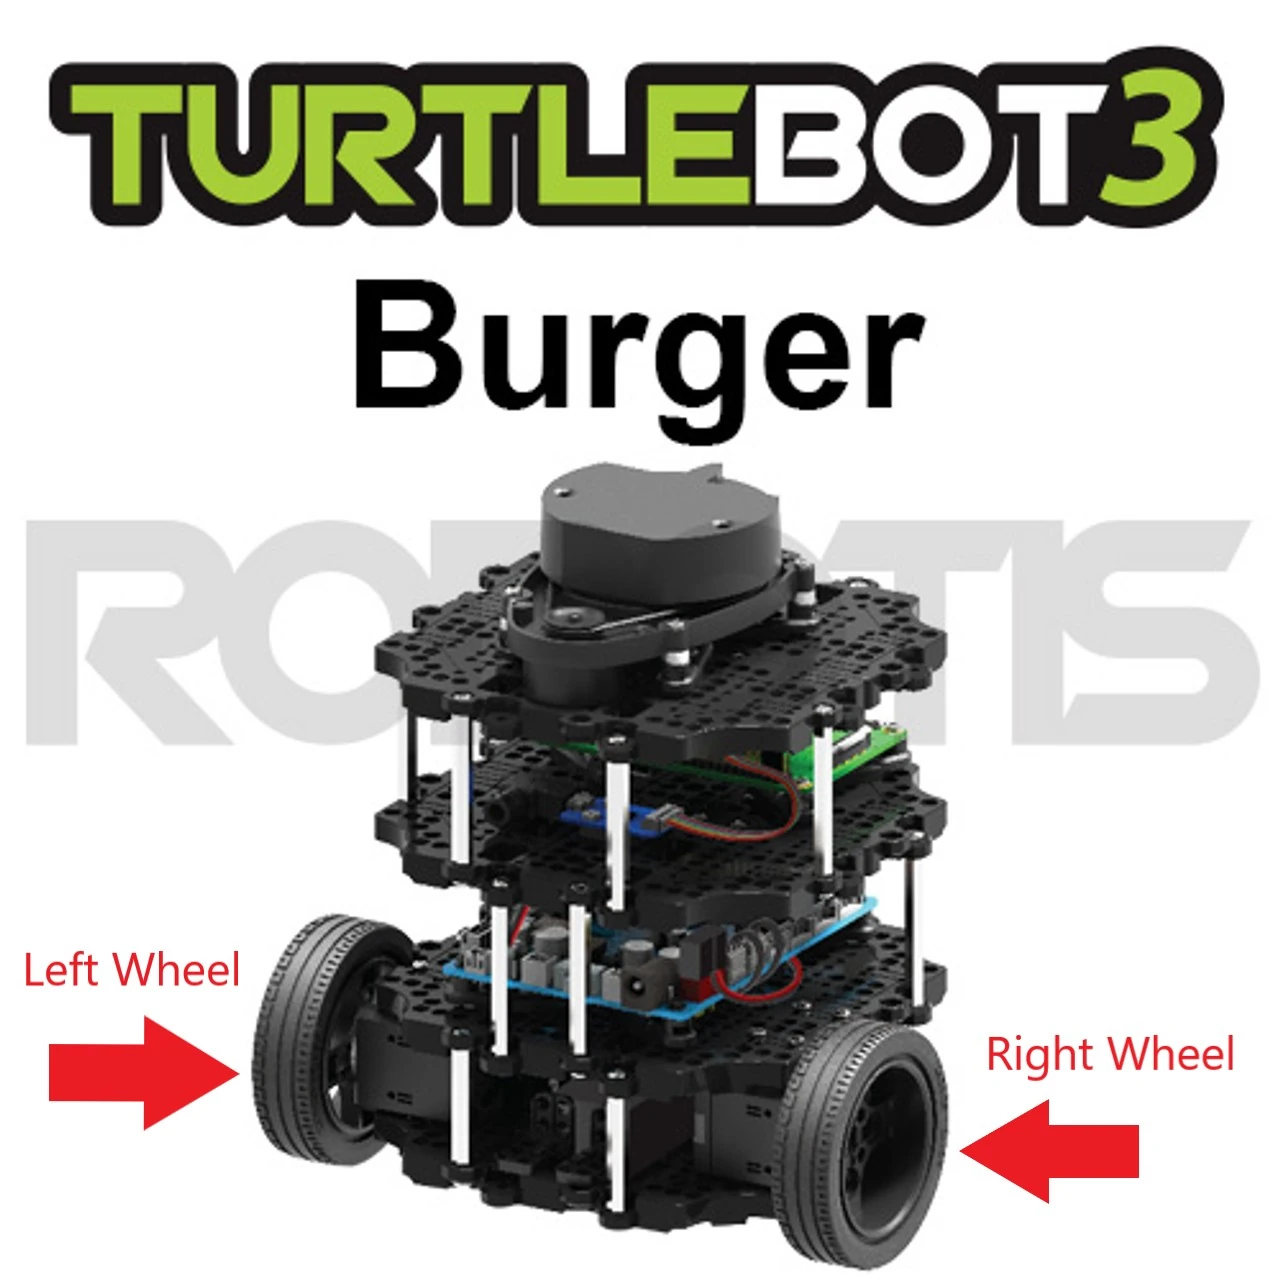 Turtlebot image with arrows noting wheels